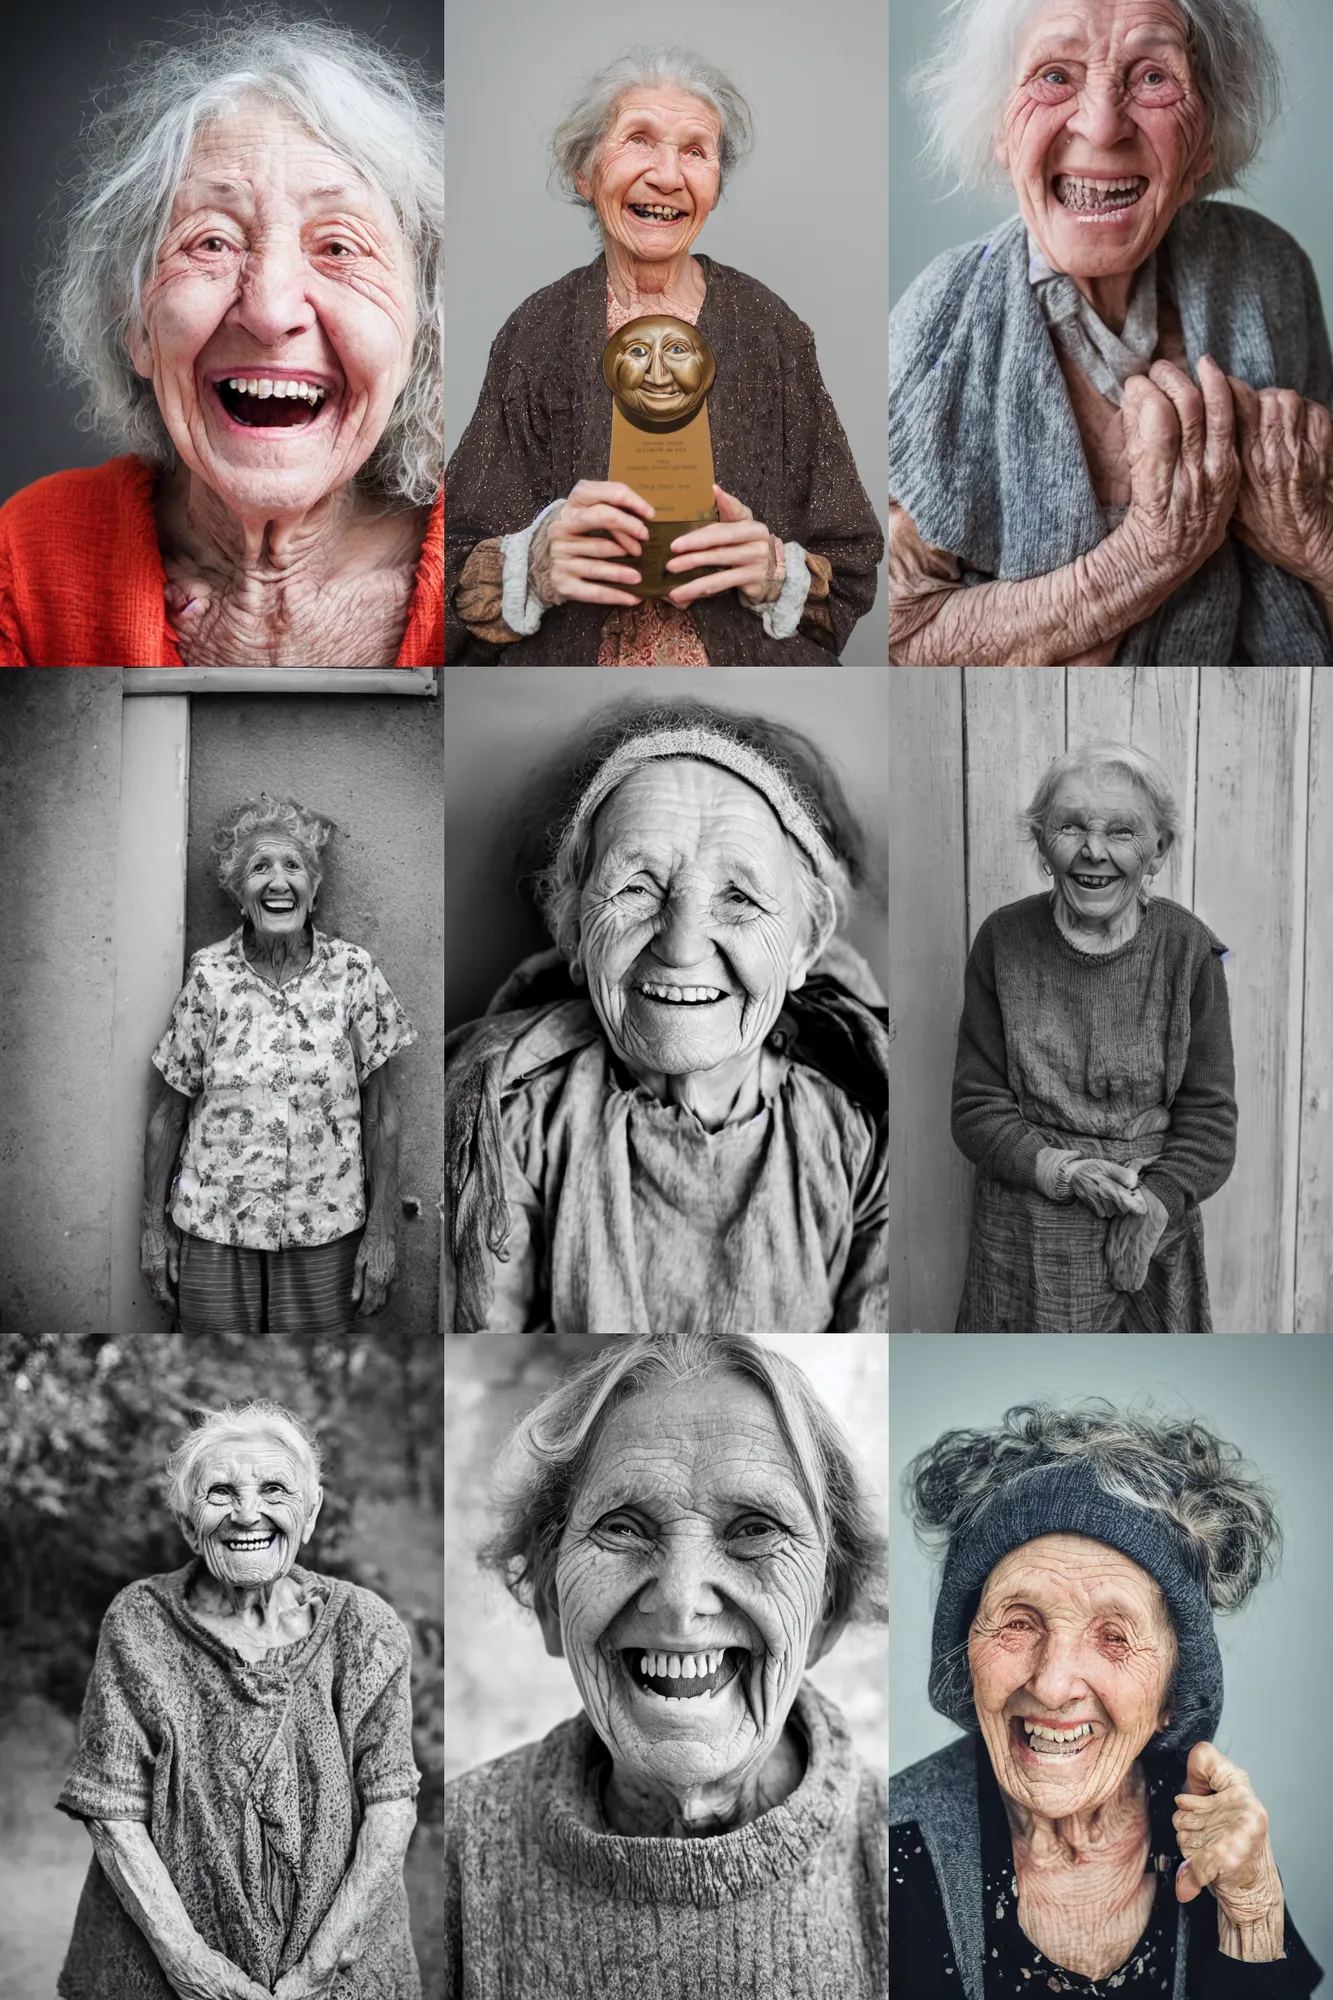 Prompt: A portrait of an old woman with an disturbingly large smile, award winning photo